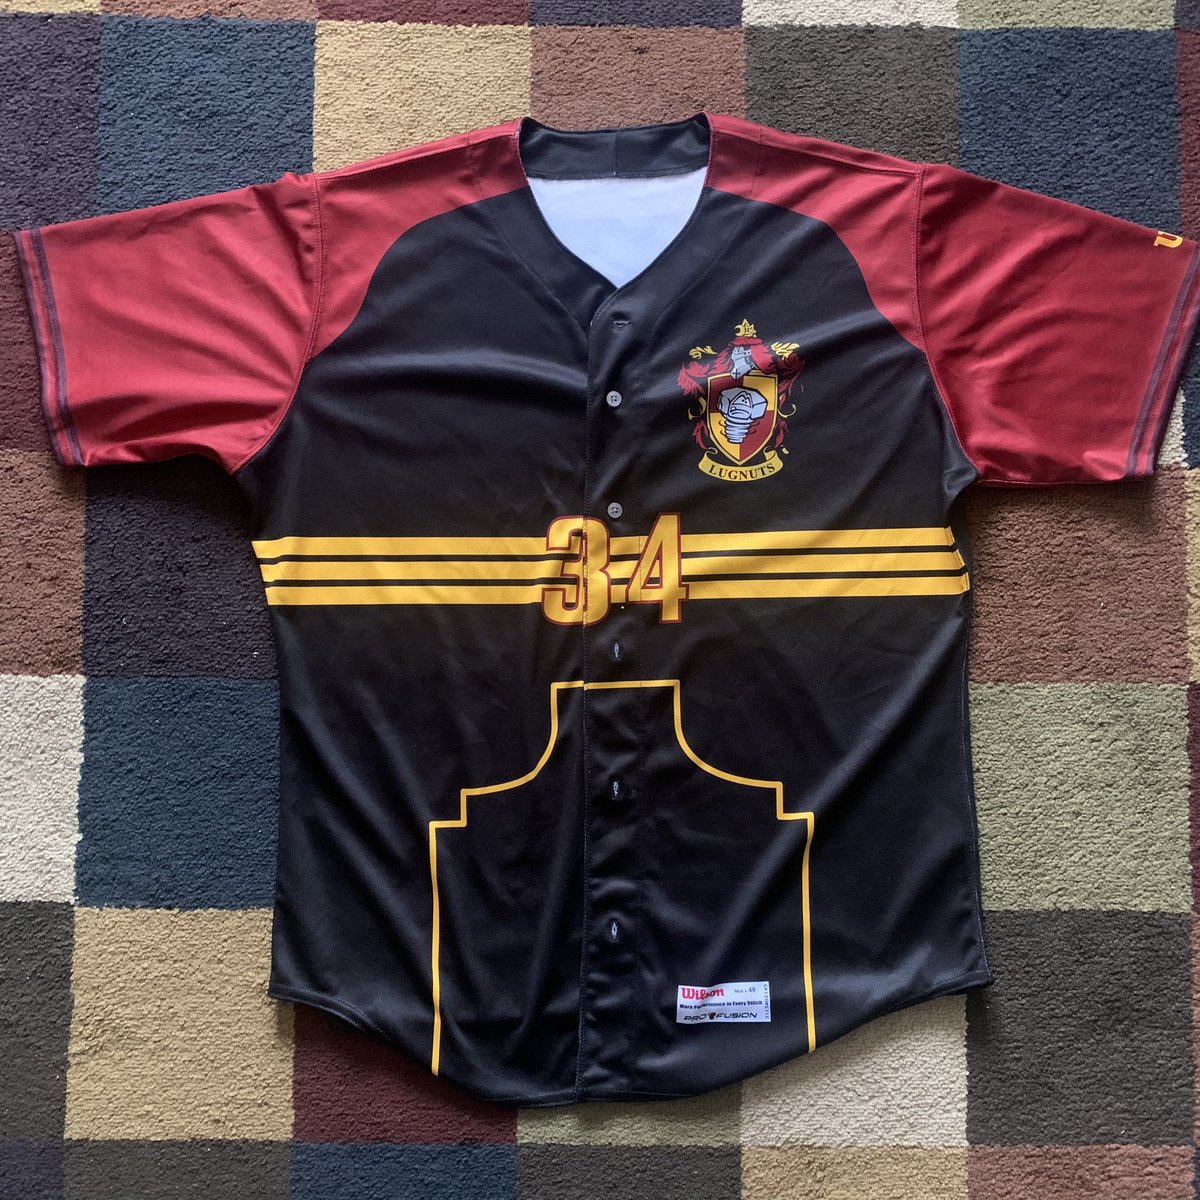 2019 Harry Potter Night Promo Jersey ( @bmaysayheyy liked these so she got one too lol)